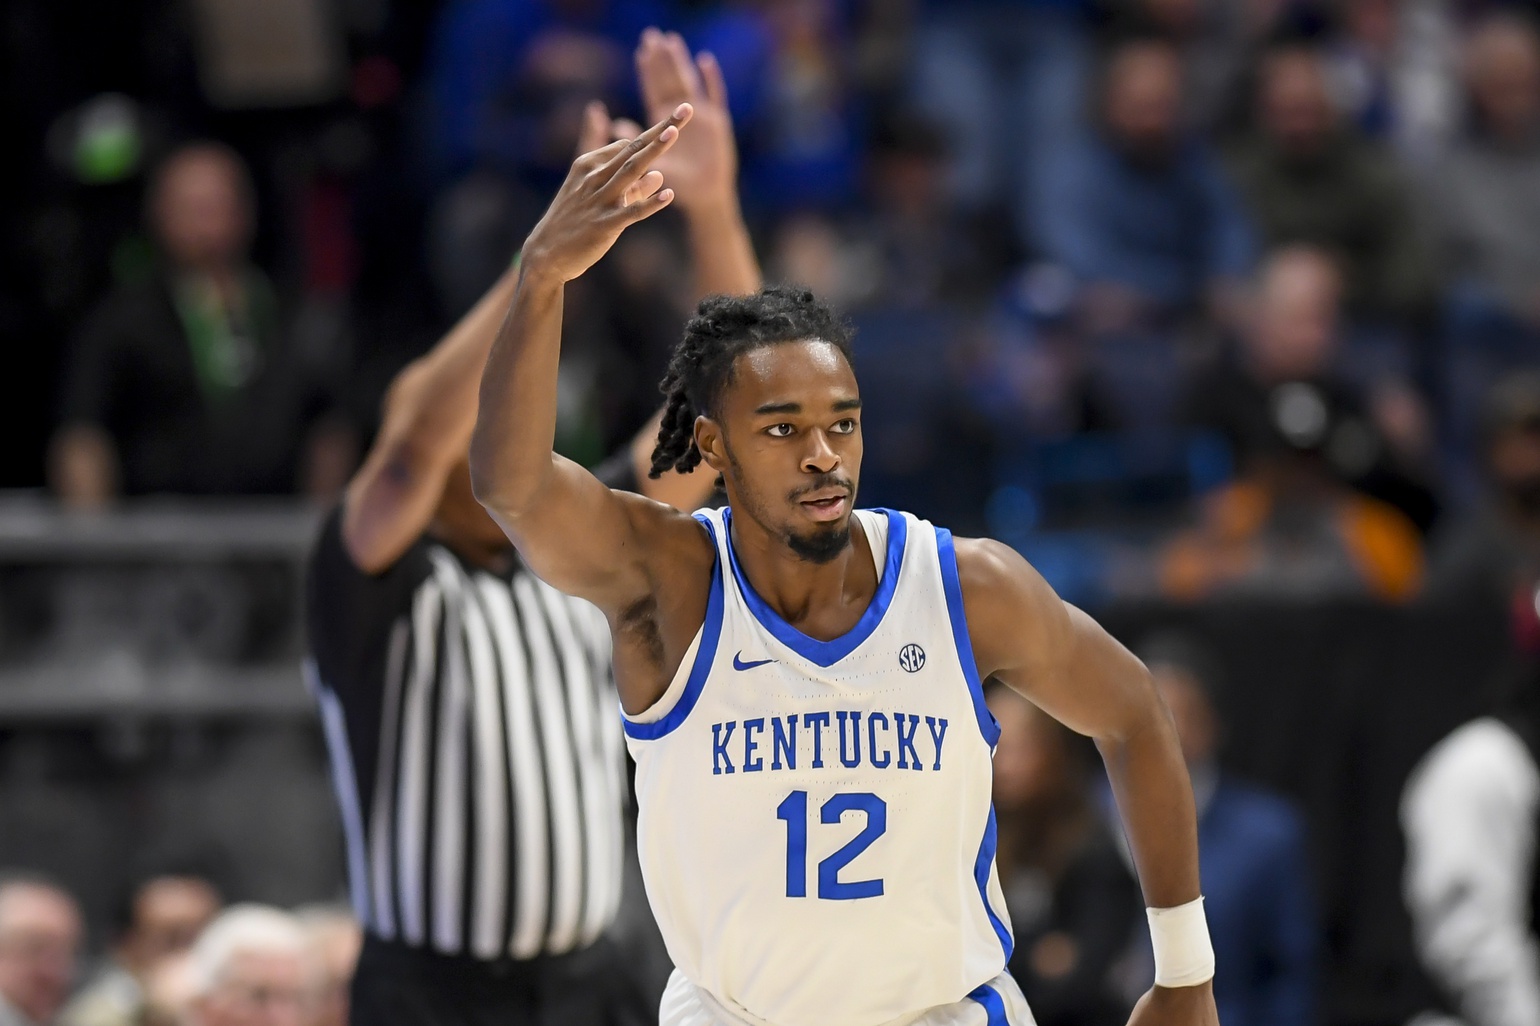 Kentucky Wildcats guard Antonio Reeves (12) celebrates his three point basket against the Texas A&M Aggies during the first half at Bridgestone Arena. Mandatory Credit: Steve Roberts-USA TODAY Sports